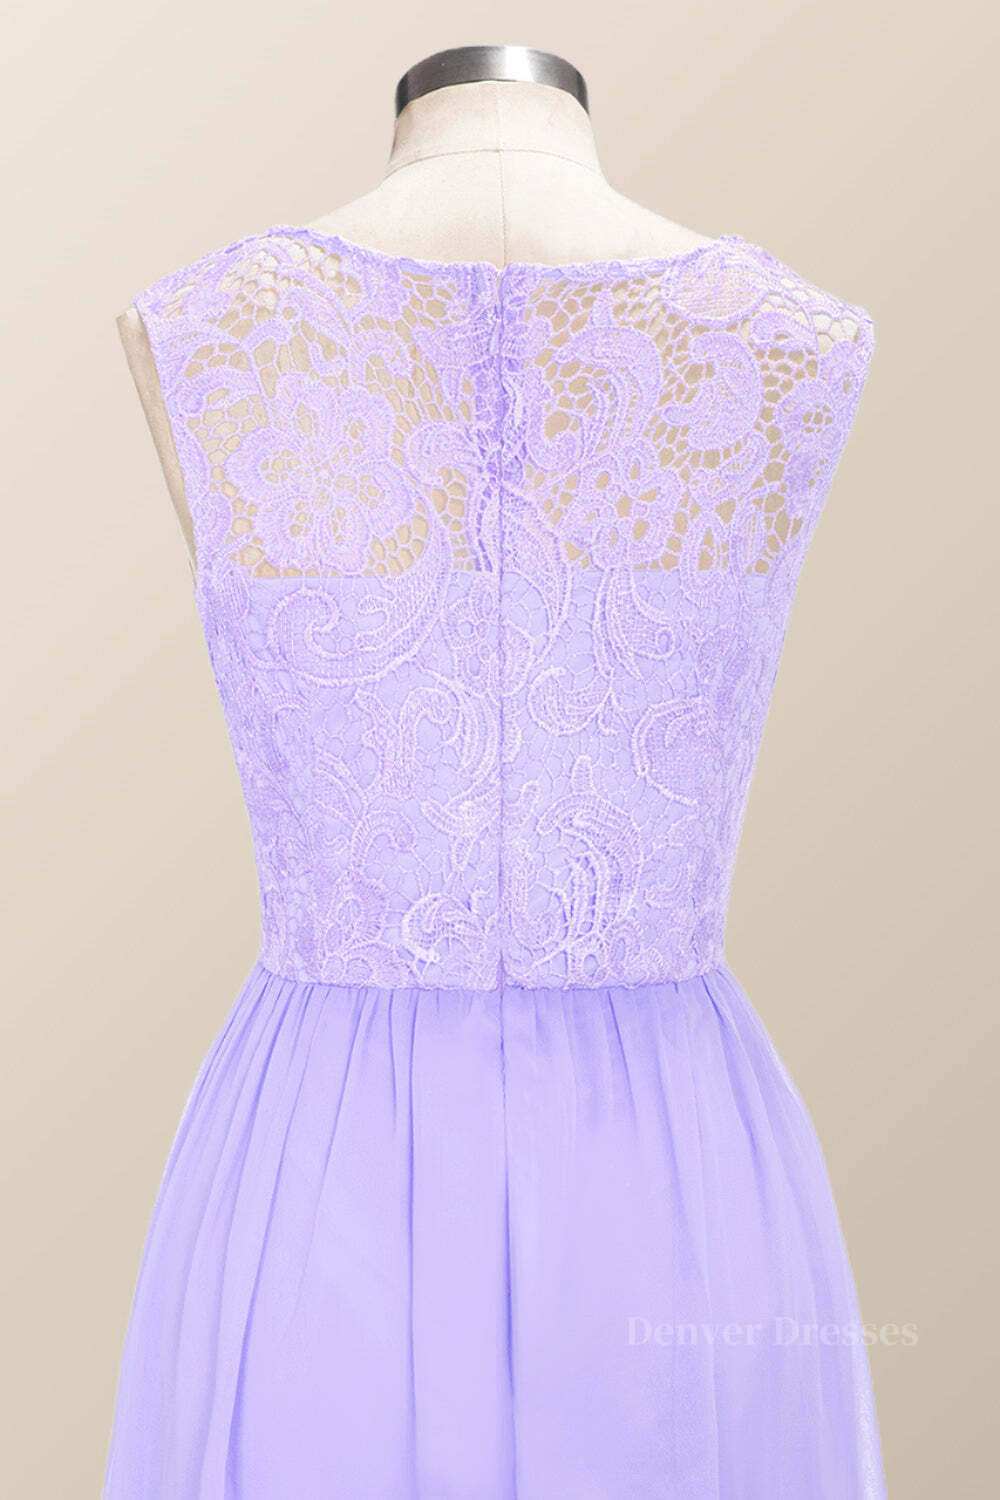 Party Dress For Girl, Scoop Lavender Lace and Chiffon Long Bridesmaid Dress